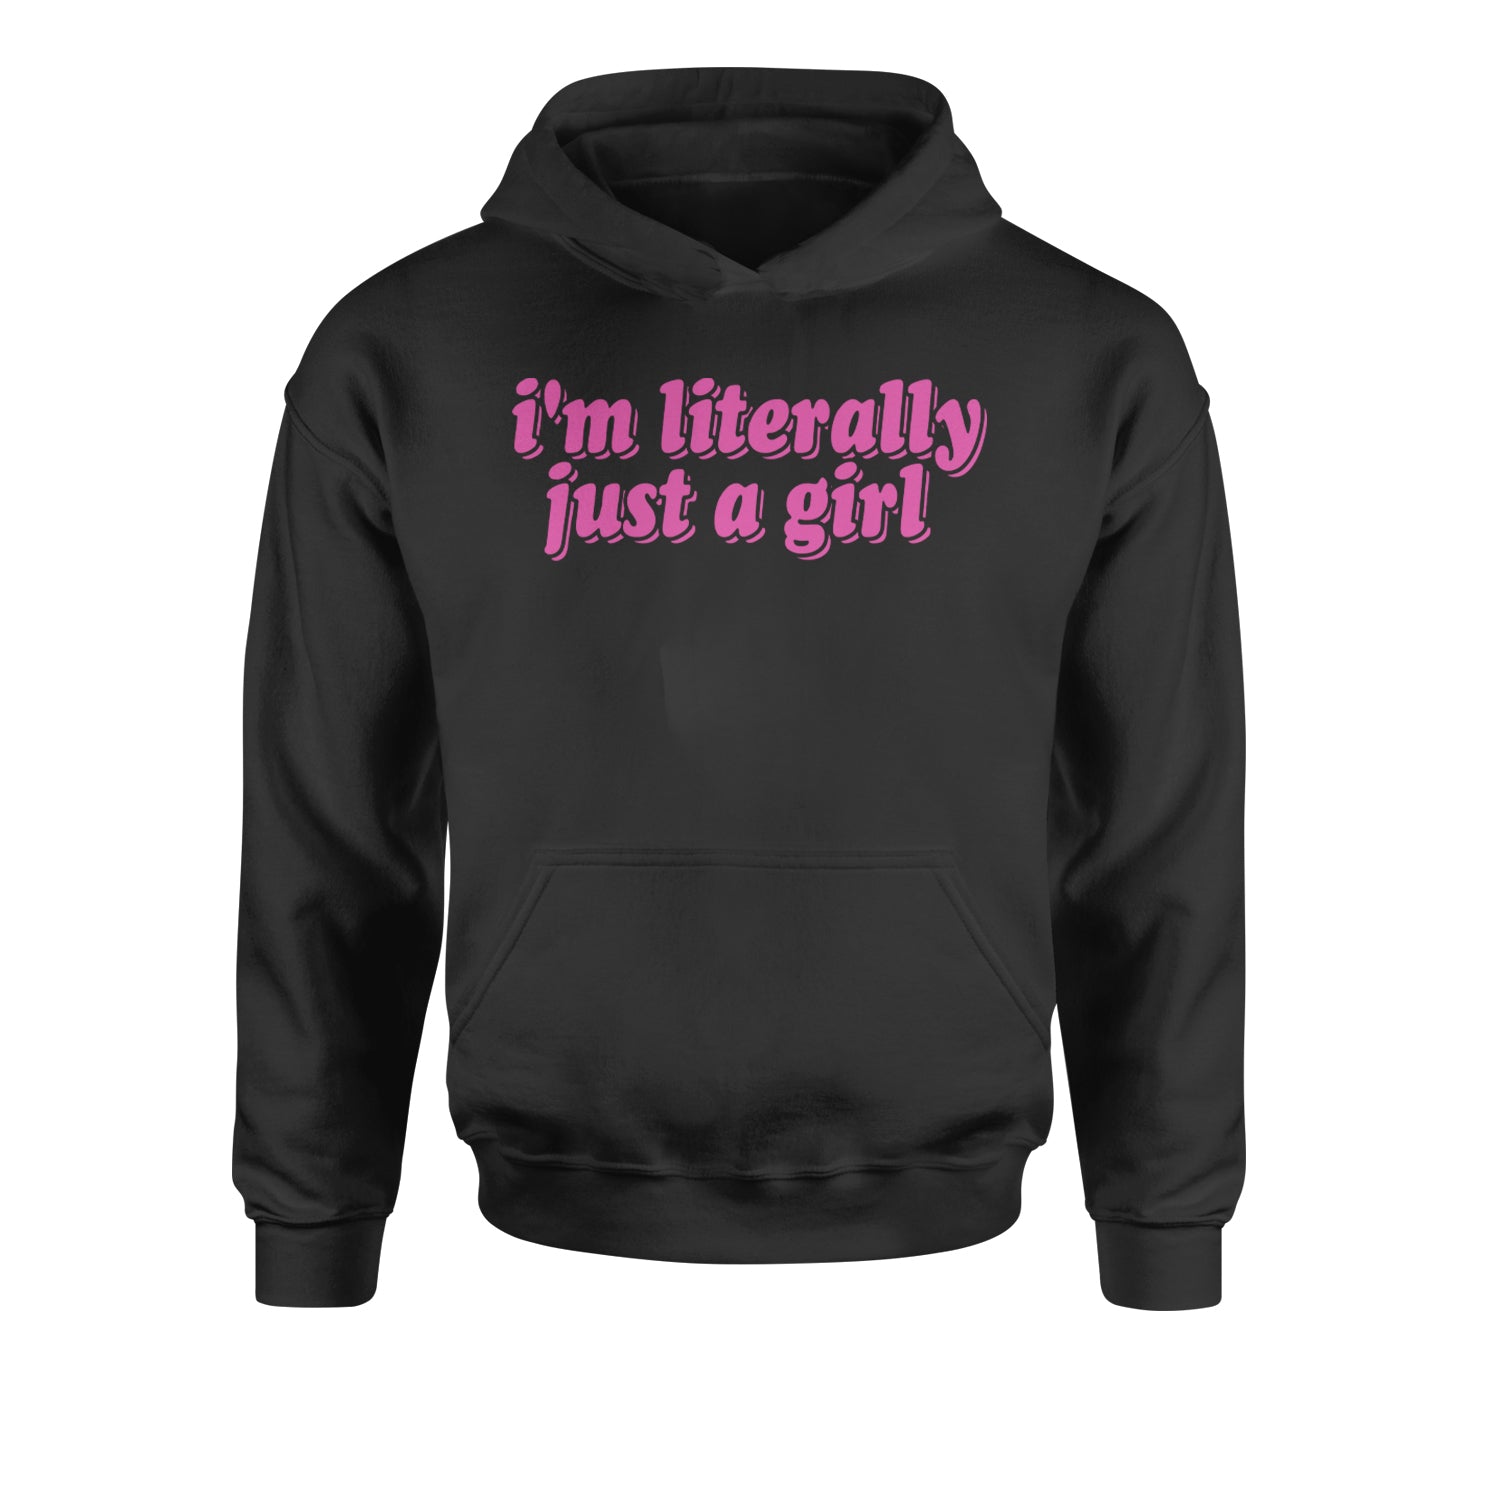 I'm Literally Just A Girl Youth-Sized Hoodie